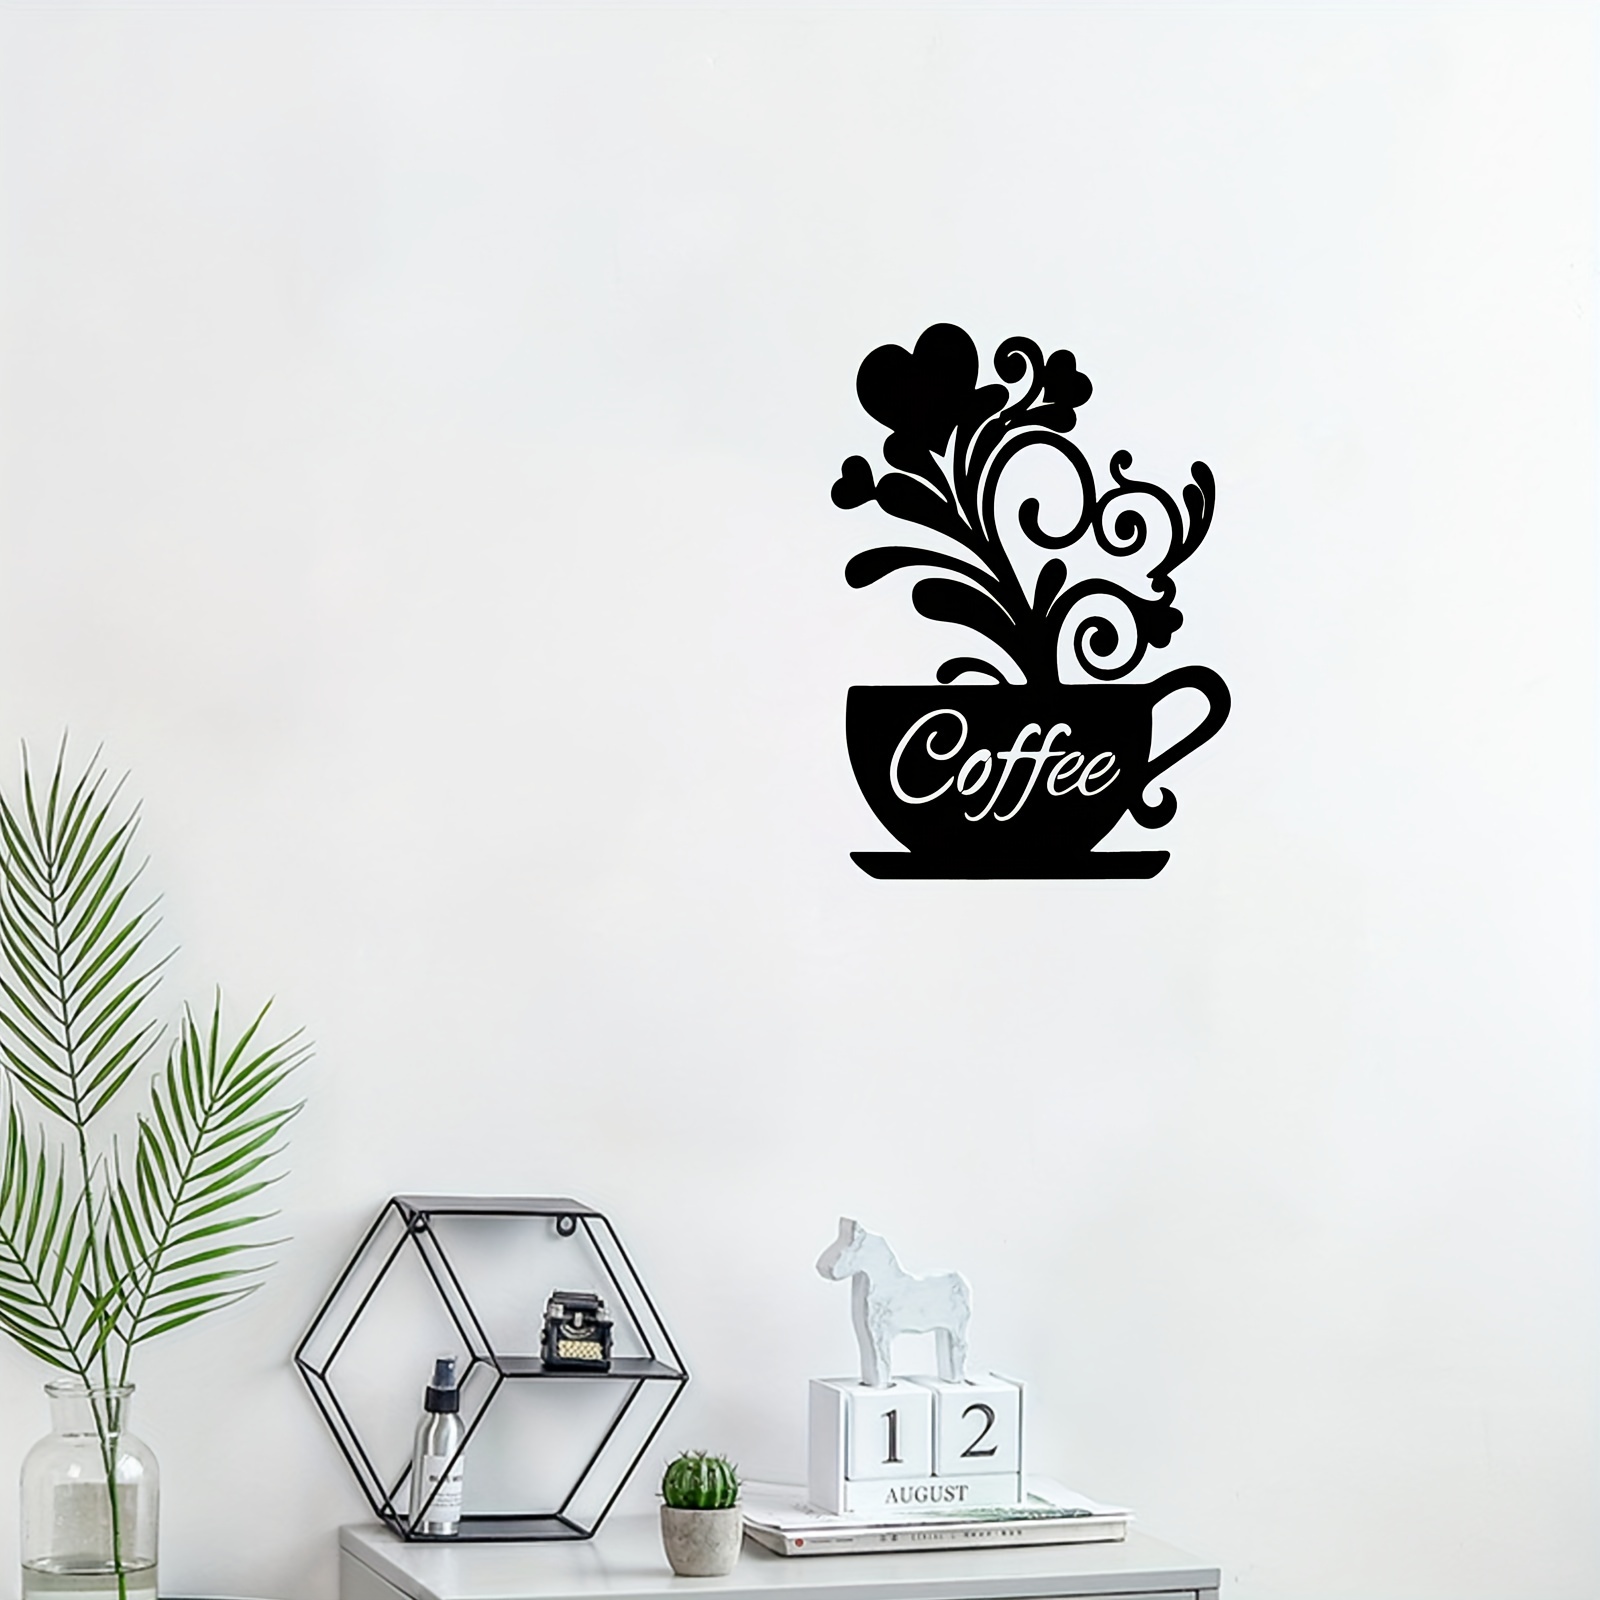 2 Pieces Coffee Cup Wall Decor Black Coffee Cup Silhouette Wood Cafe Themed  Wall Art Cup Mug Scrolled Silhouette Metal Wall Art Decor for Coffee Shop